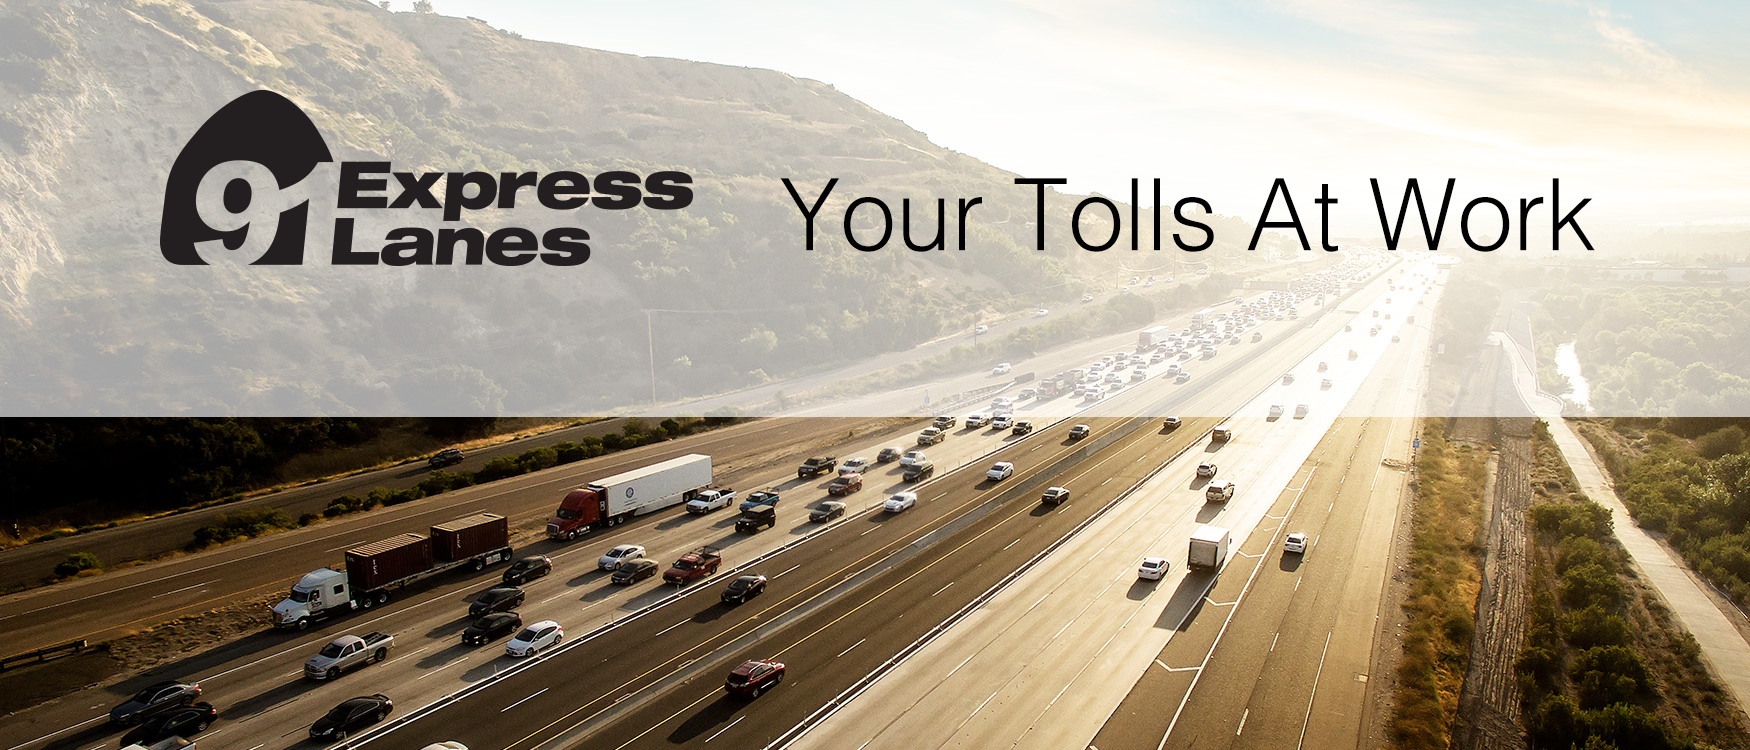 91 Express Lanes - Your tools at work